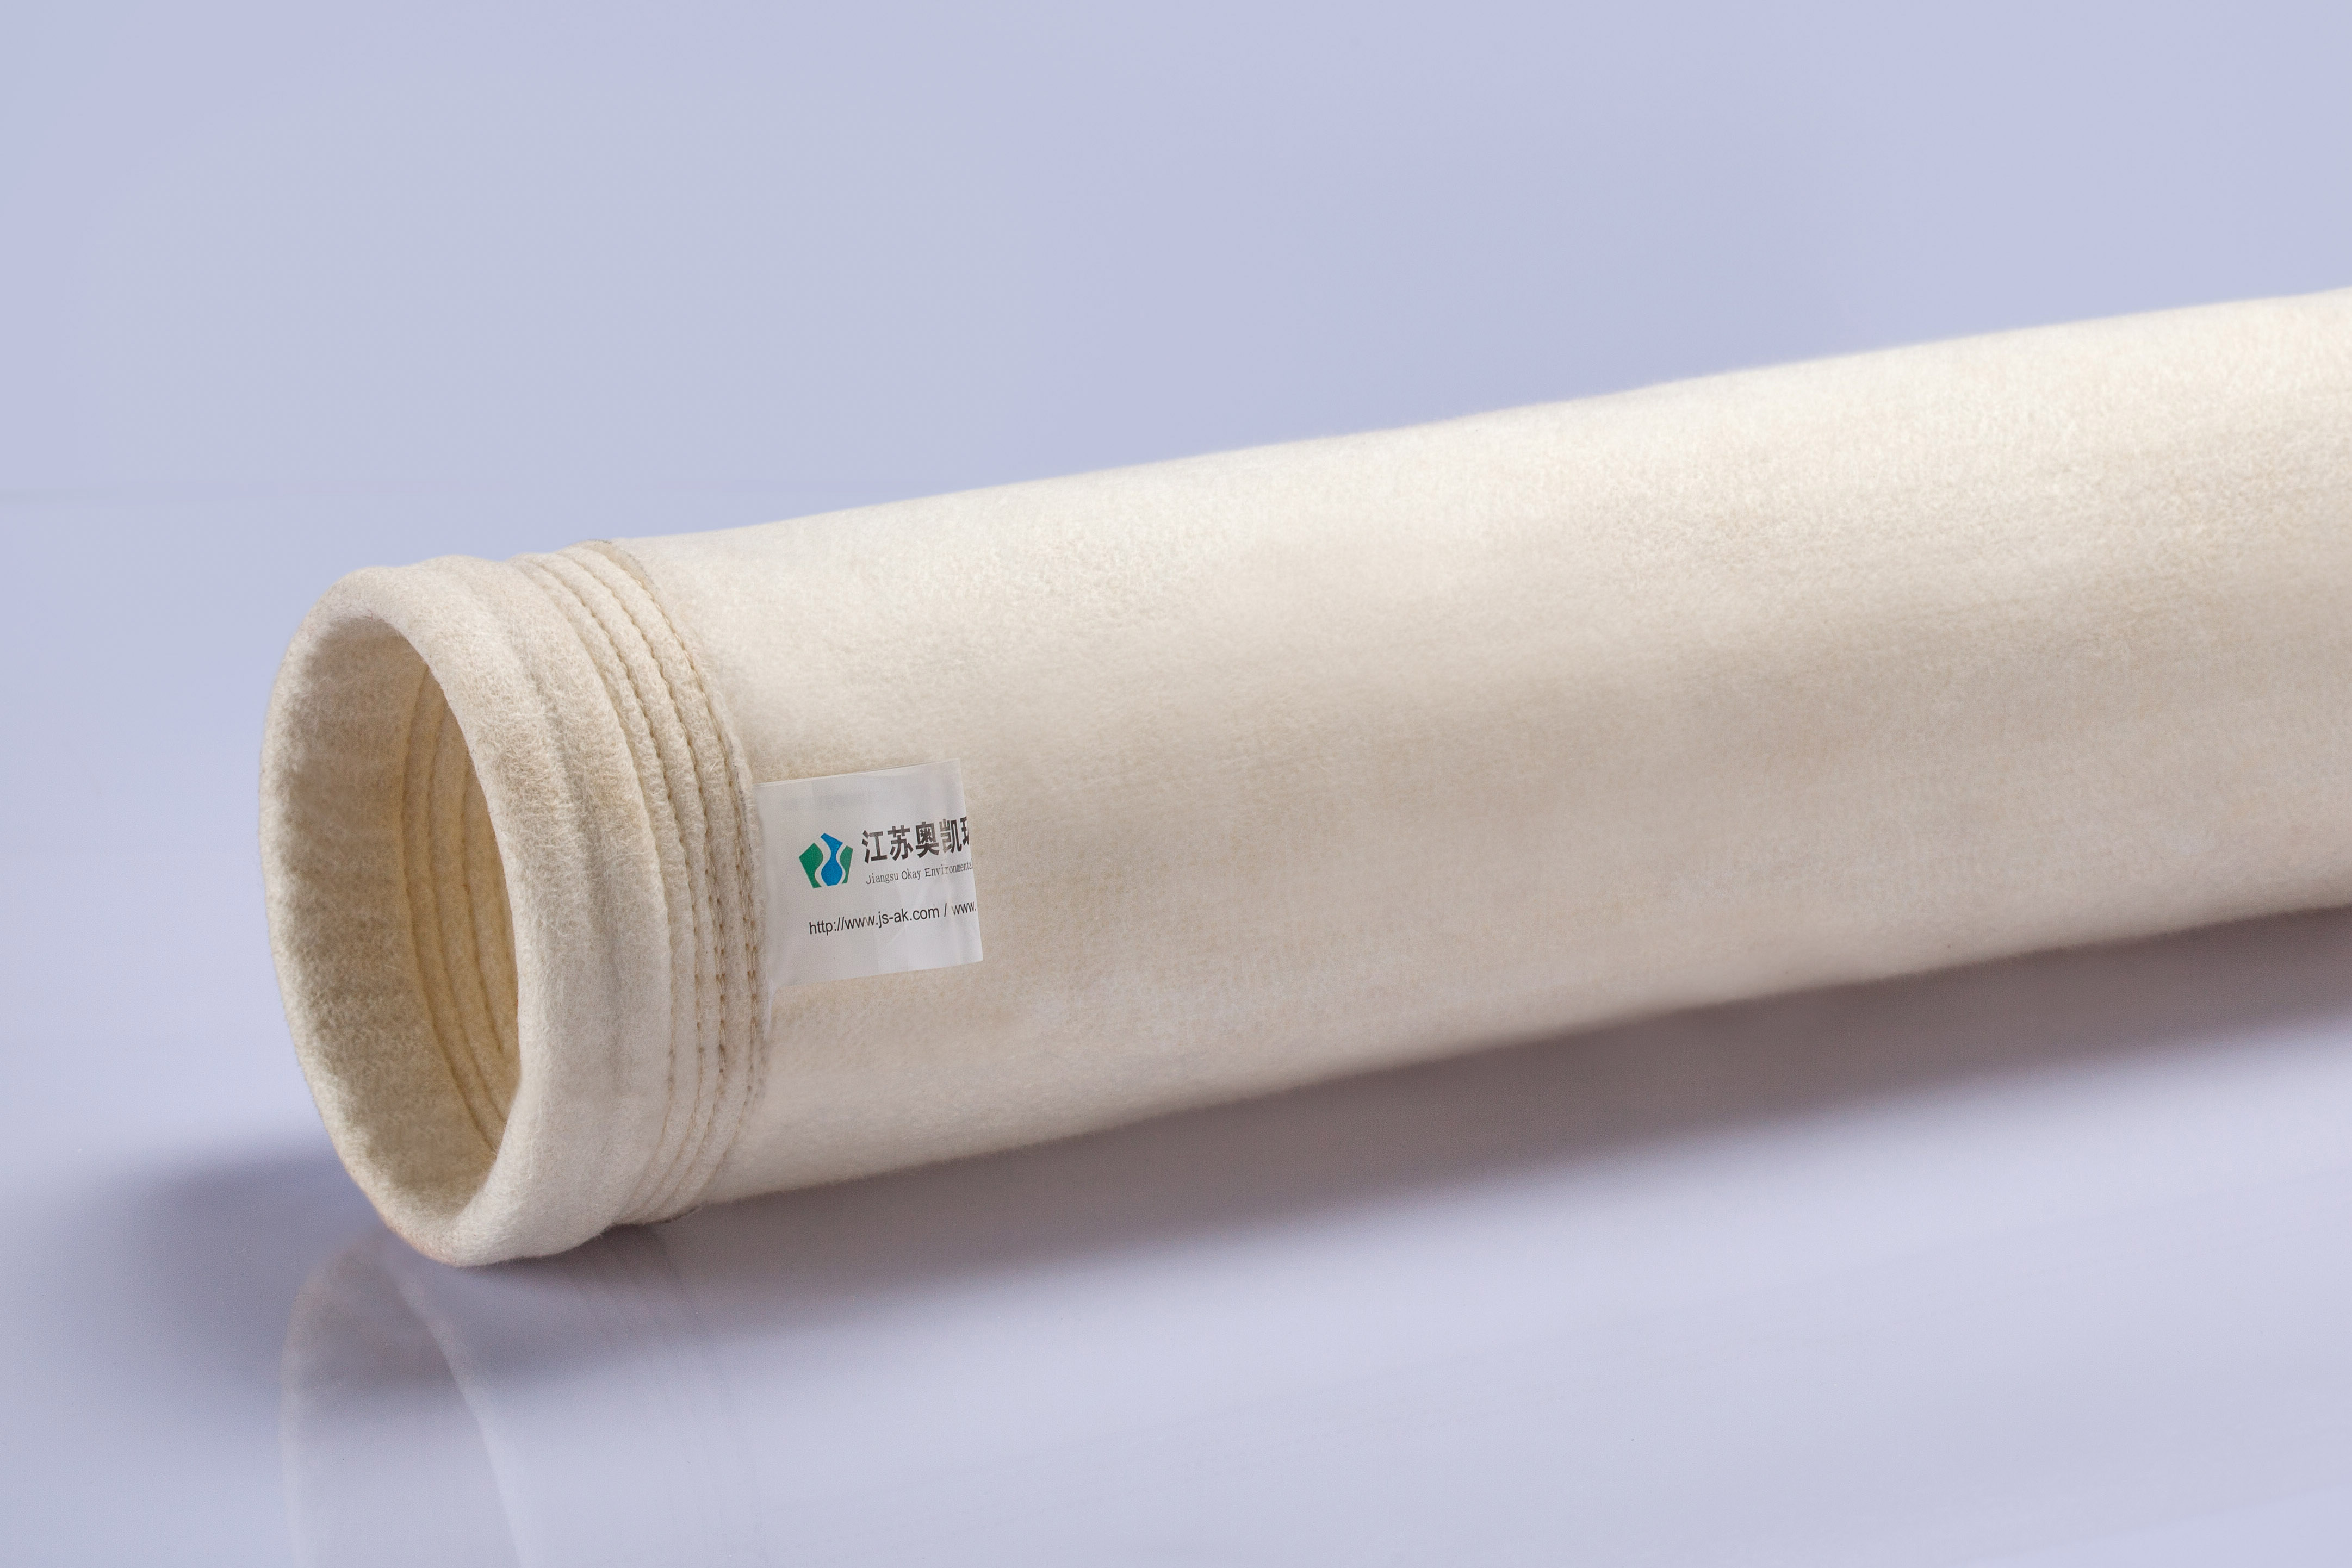 Reasons for corrosion of PPS dust filter bag